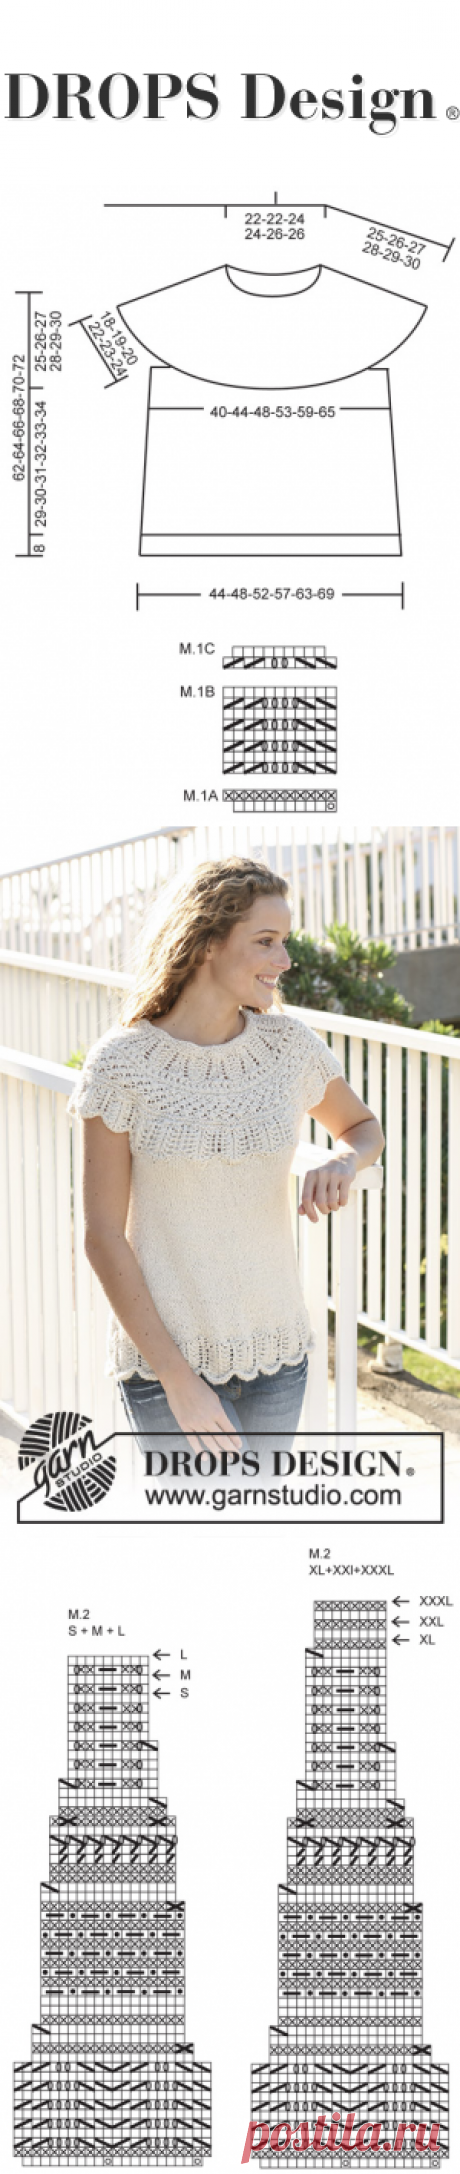 Corolla / DROPS 113-16 - Free knitting patterns by DROPS Design